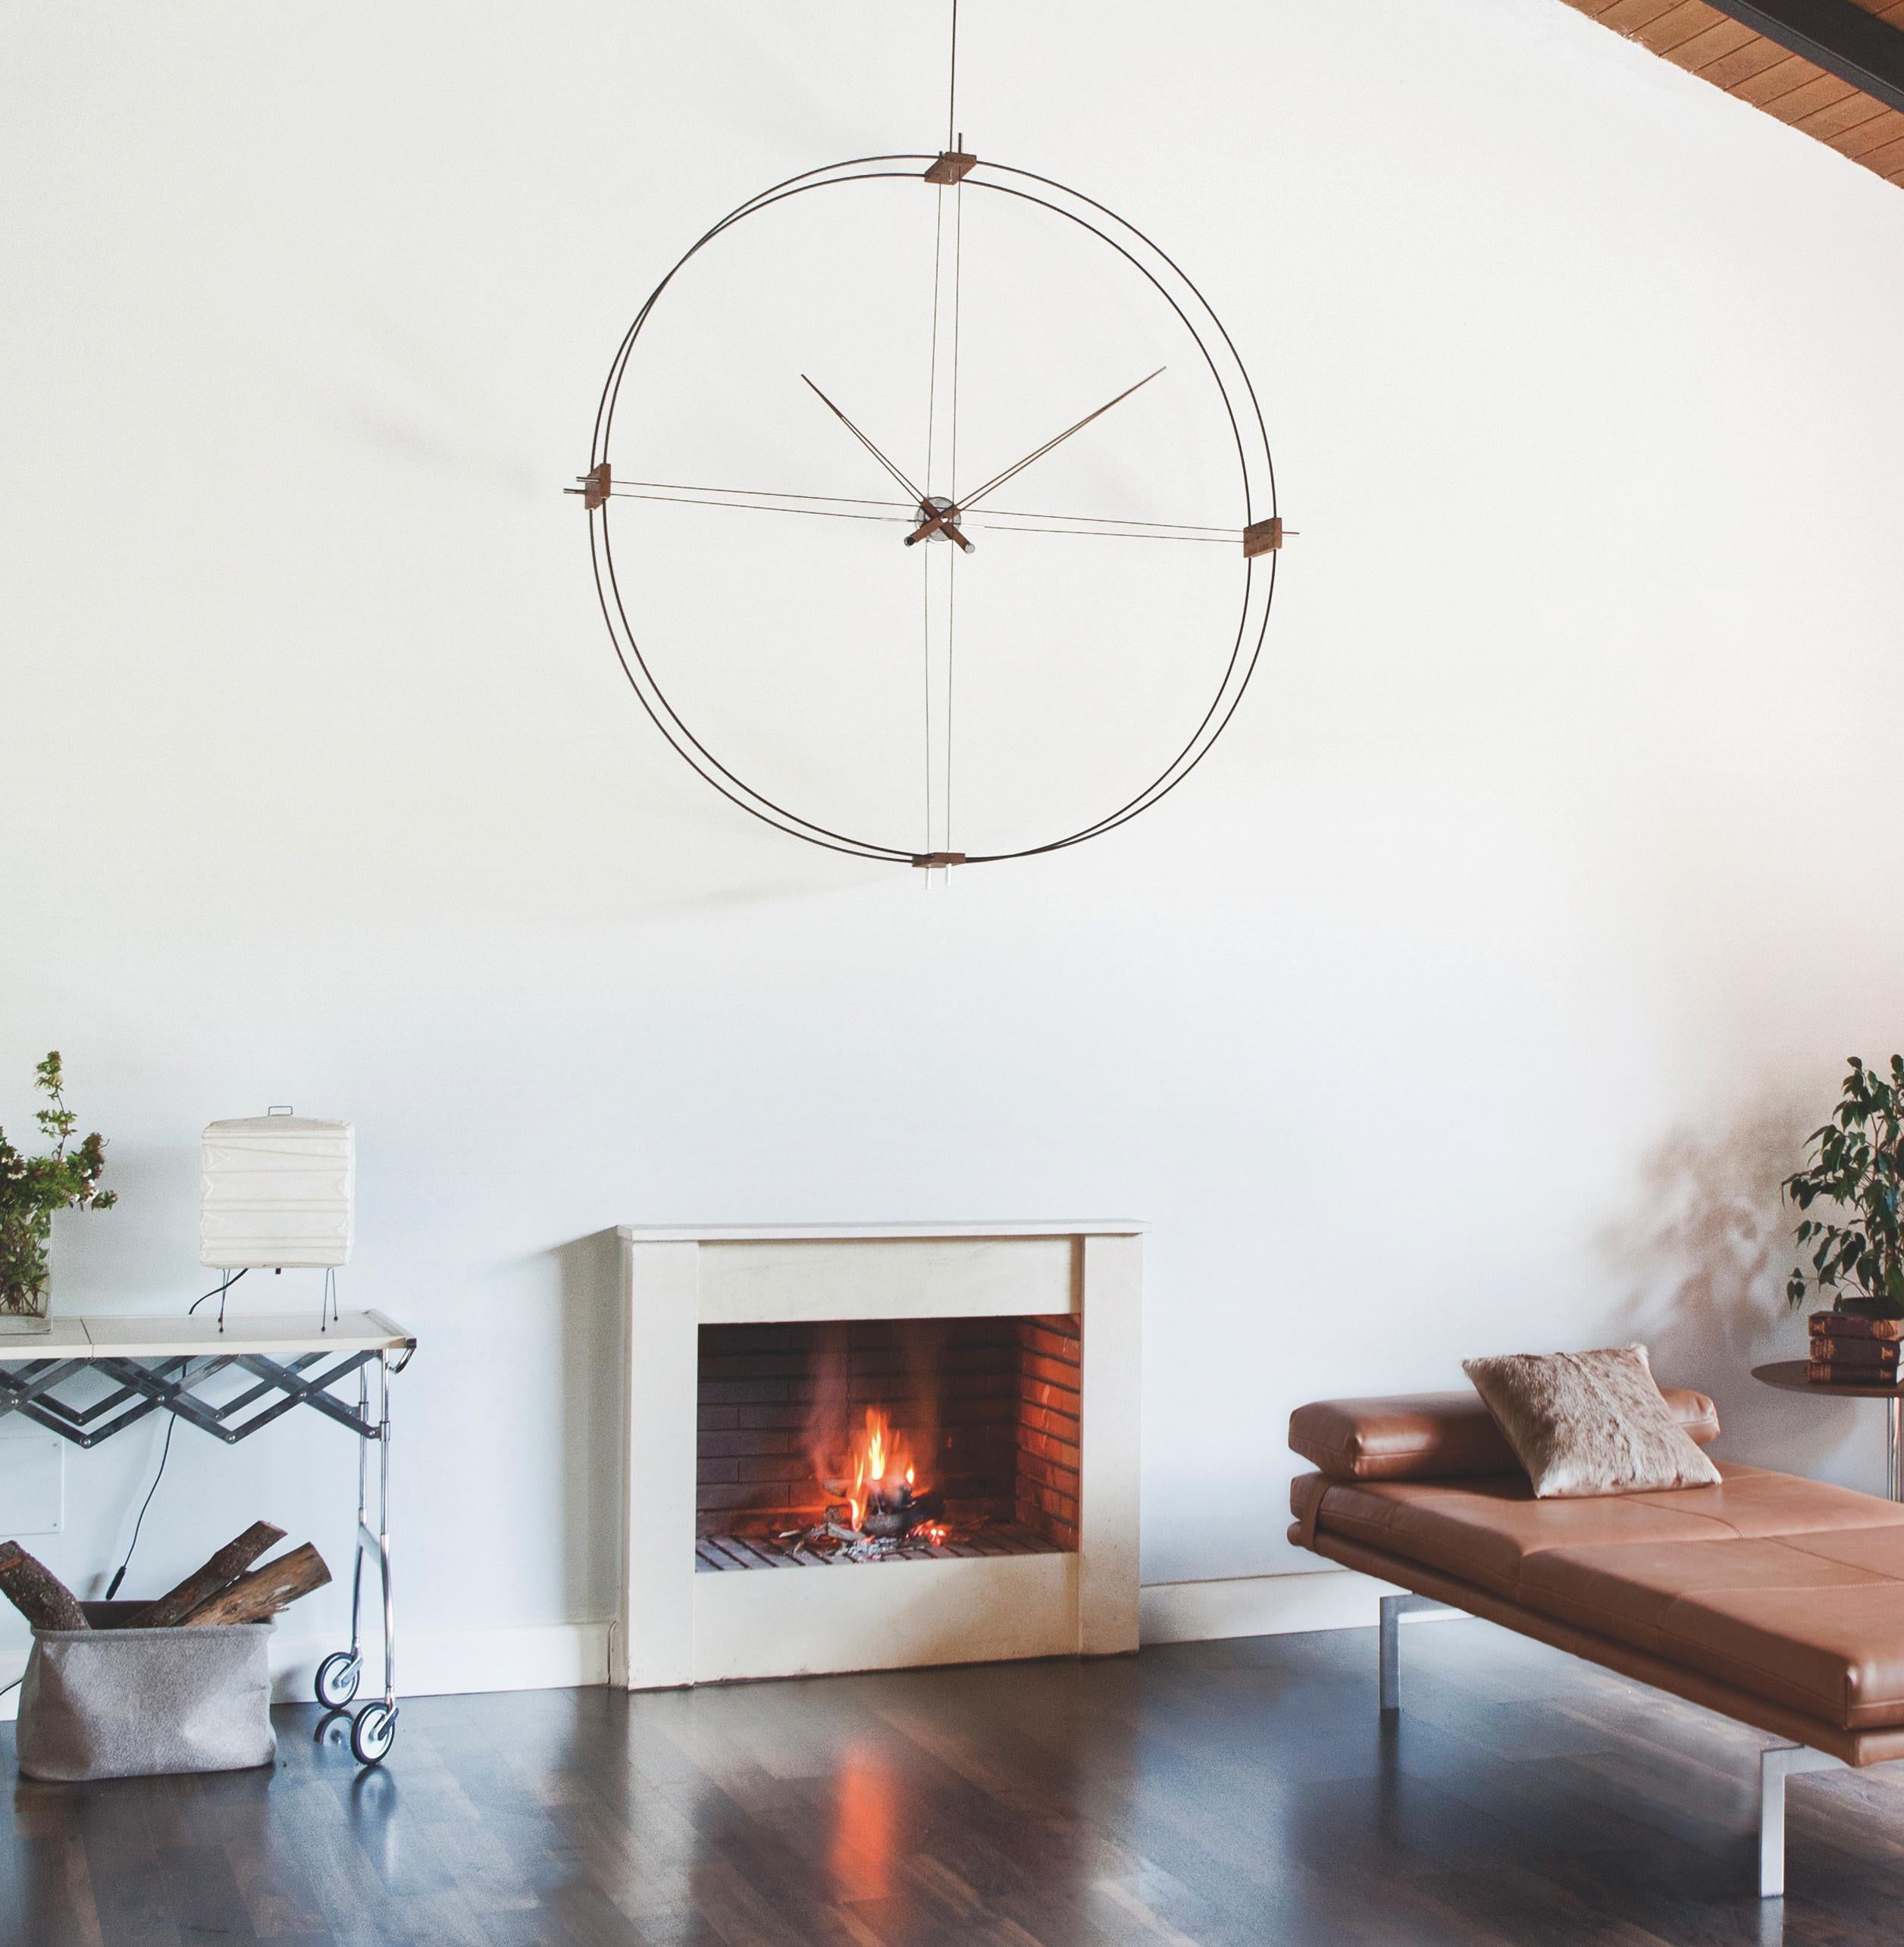 
The largest diameter Nomon clock (130 cm), with double black or white fiberglass ring, metallic details and natural walnut hands. Installation to wall or ceiling.

Clock with black fiberglass which combines polished brass details and central box